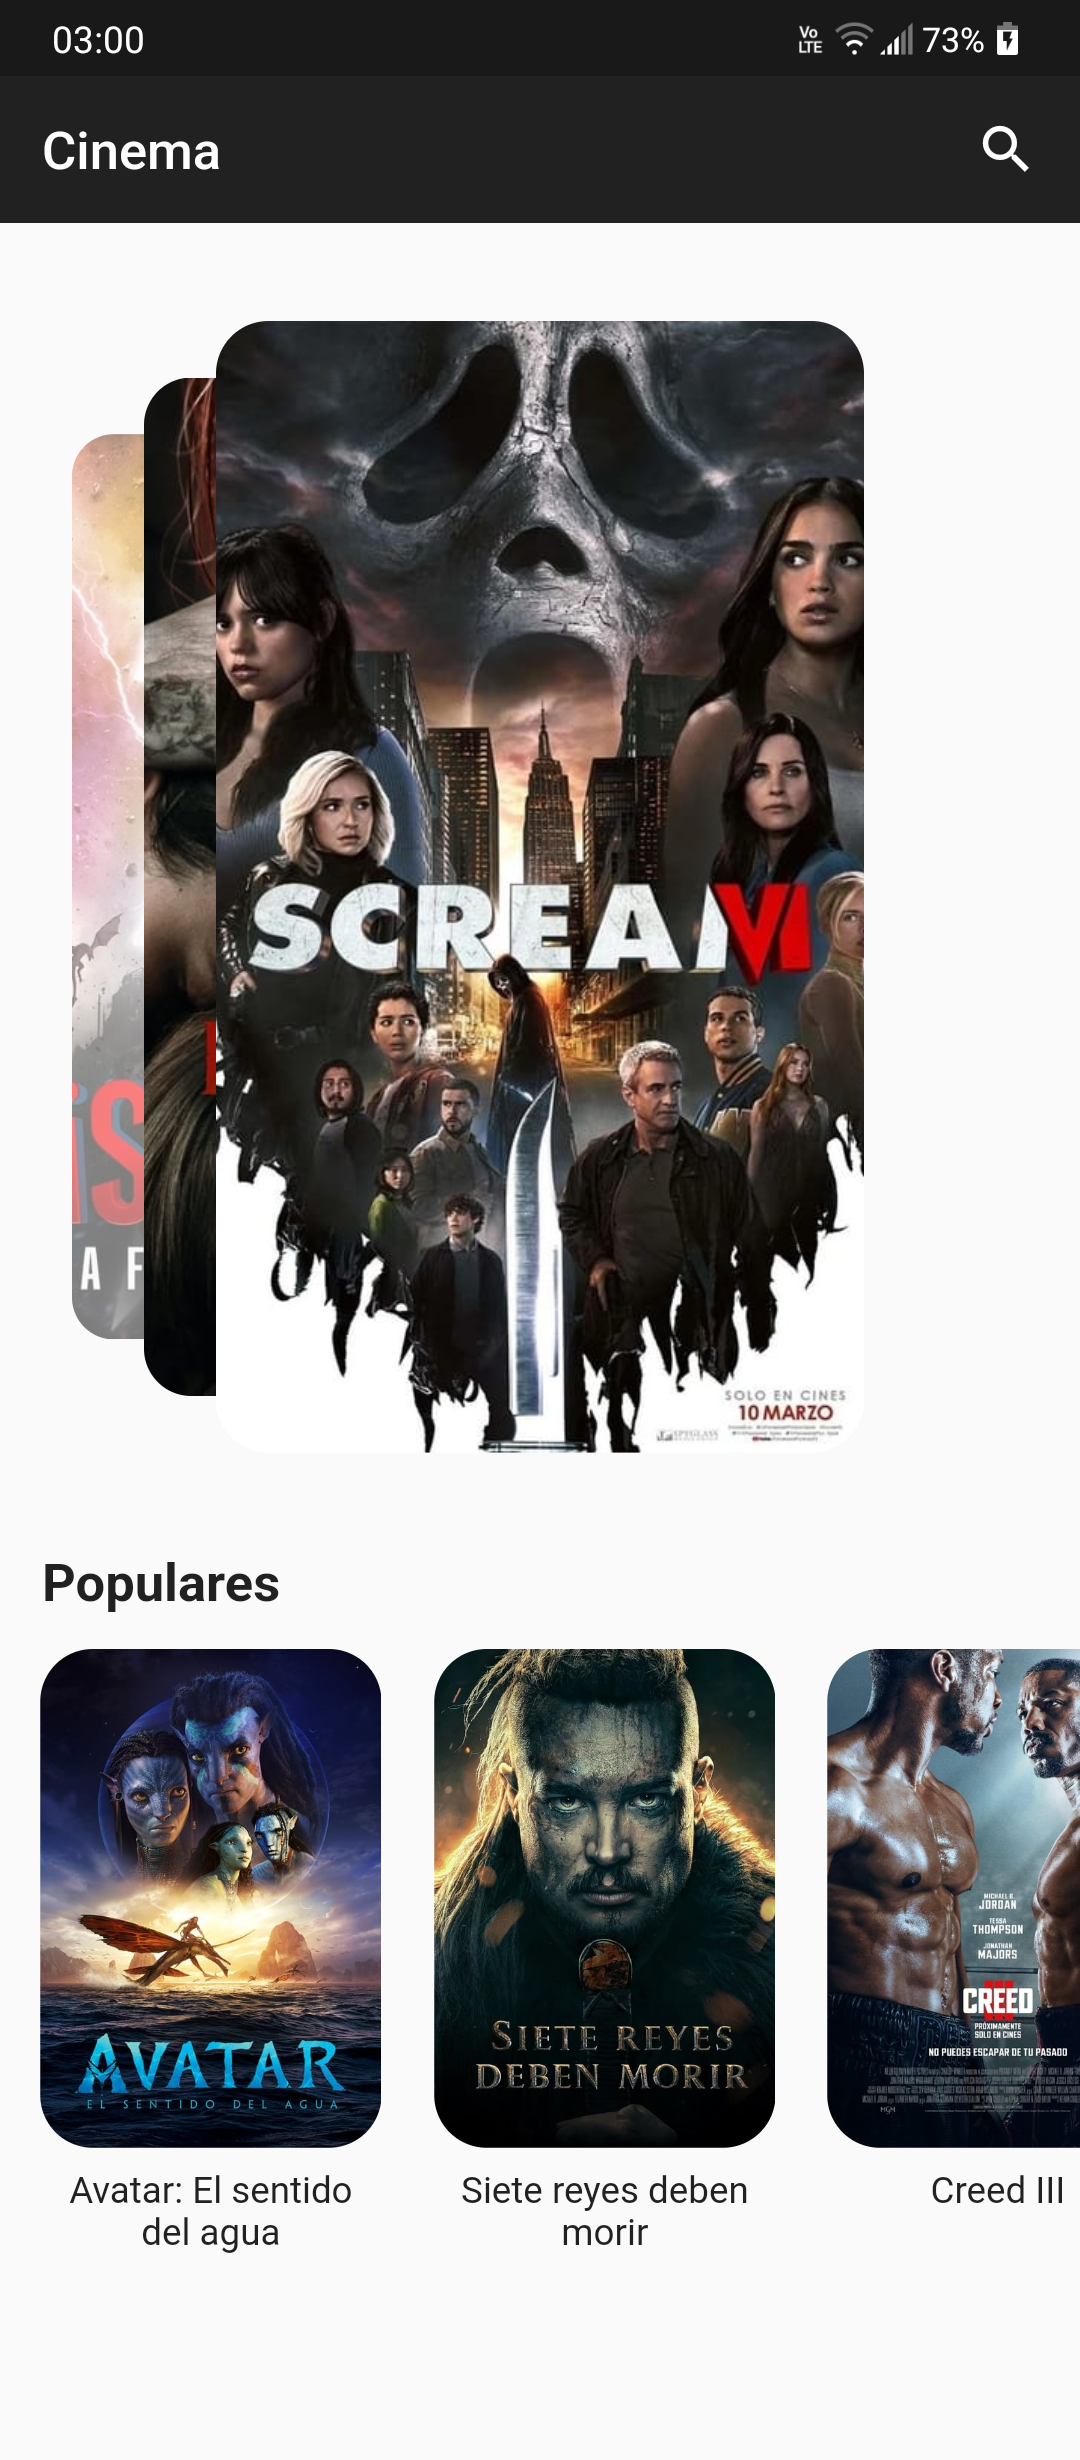 Flutter application that implements a Cinema informative catalog with many design shapes and effects